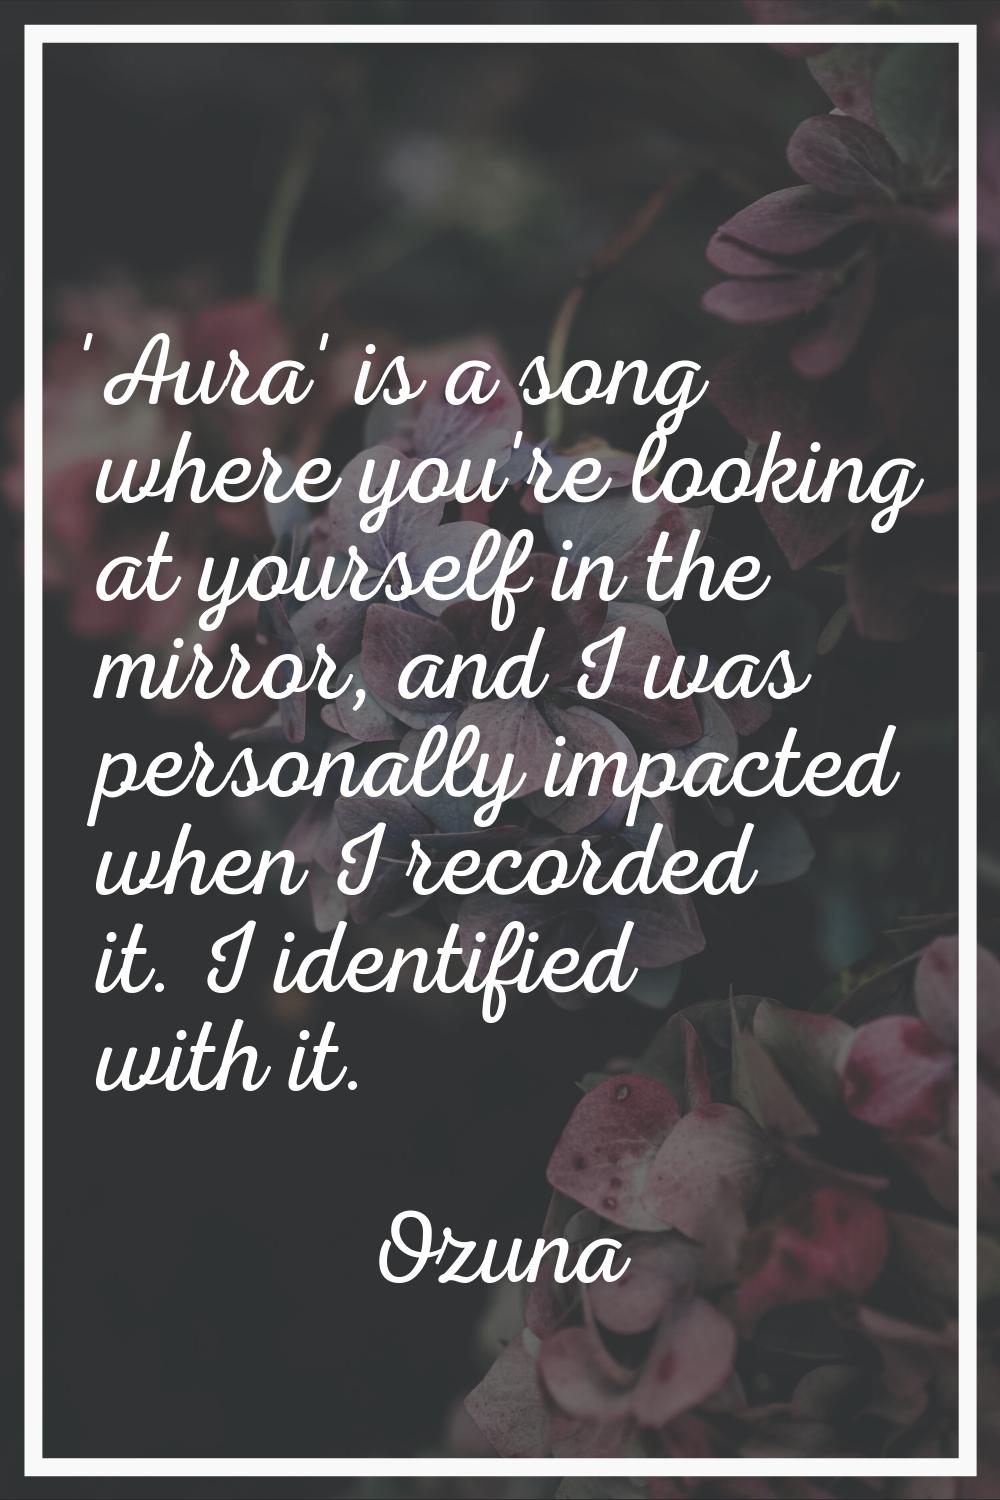 'Aura' is a song where you're looking at yourself in the mirror, and I was personally impacted when